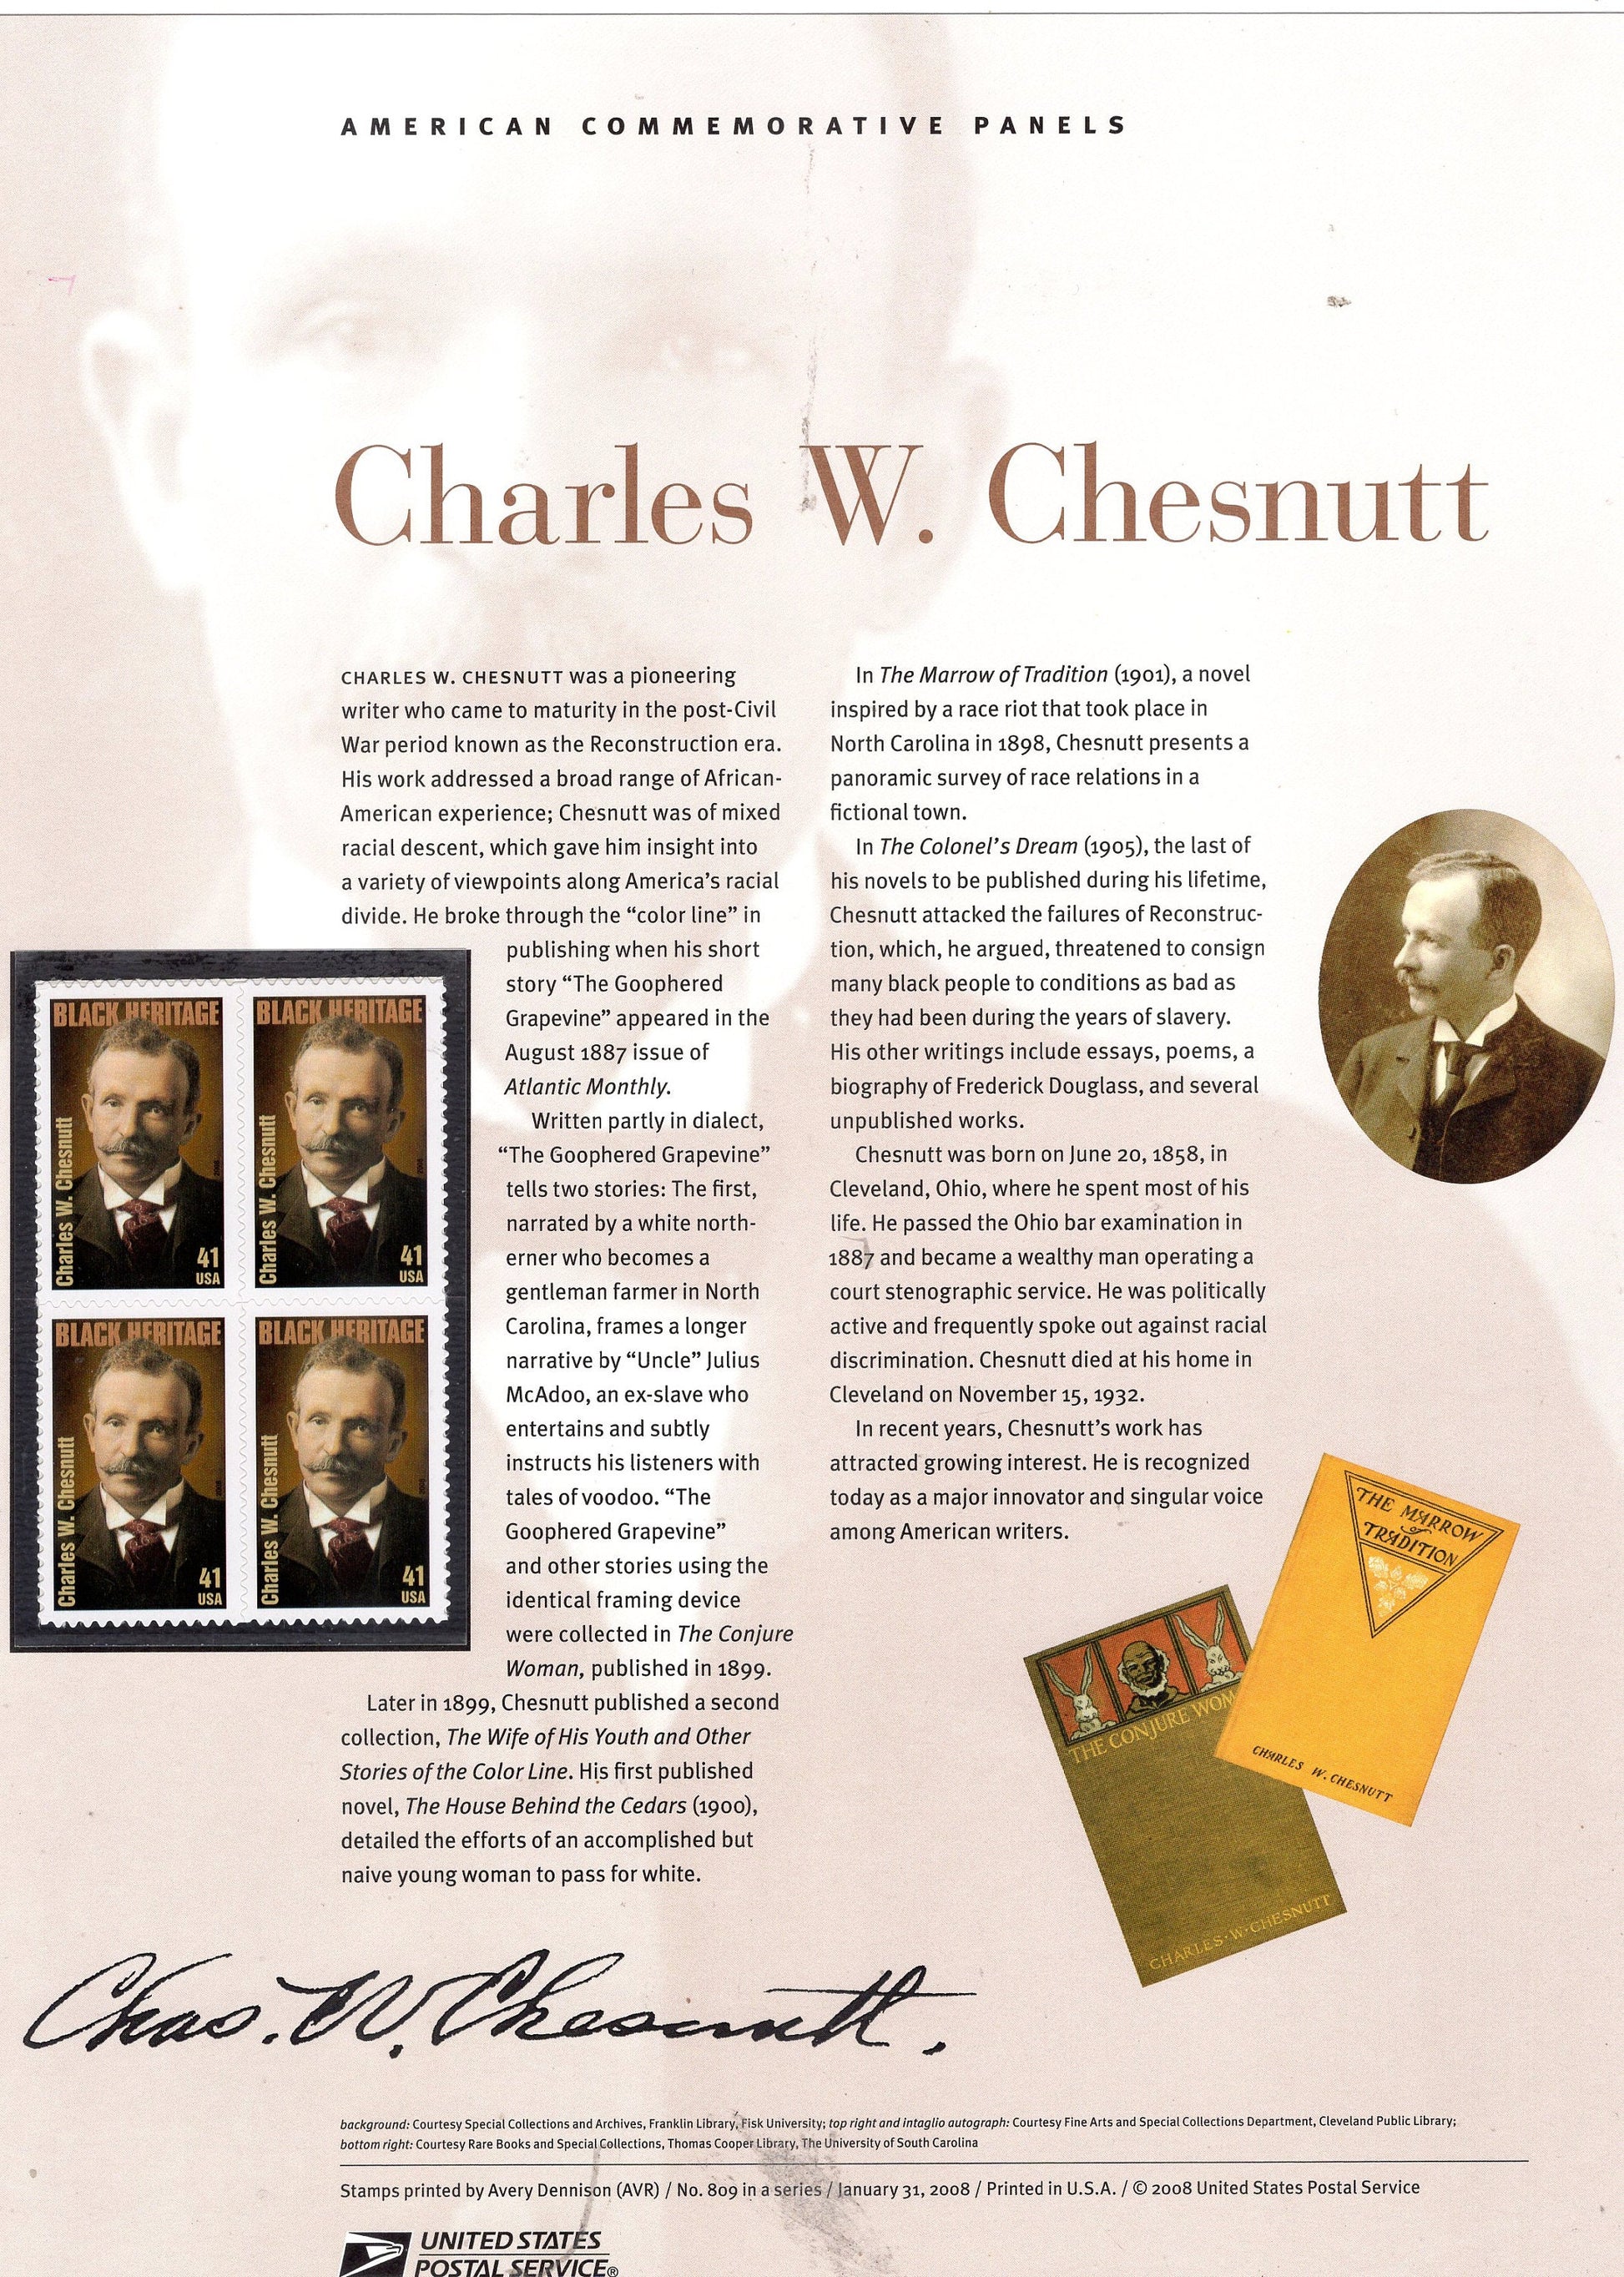 CHARLES CHESNUTT Black Heritage Writer Commemorative Panel with a Block 4 Stamps Illustrations plus Text – A Great Gift 8.5x11- Issued in 2008-